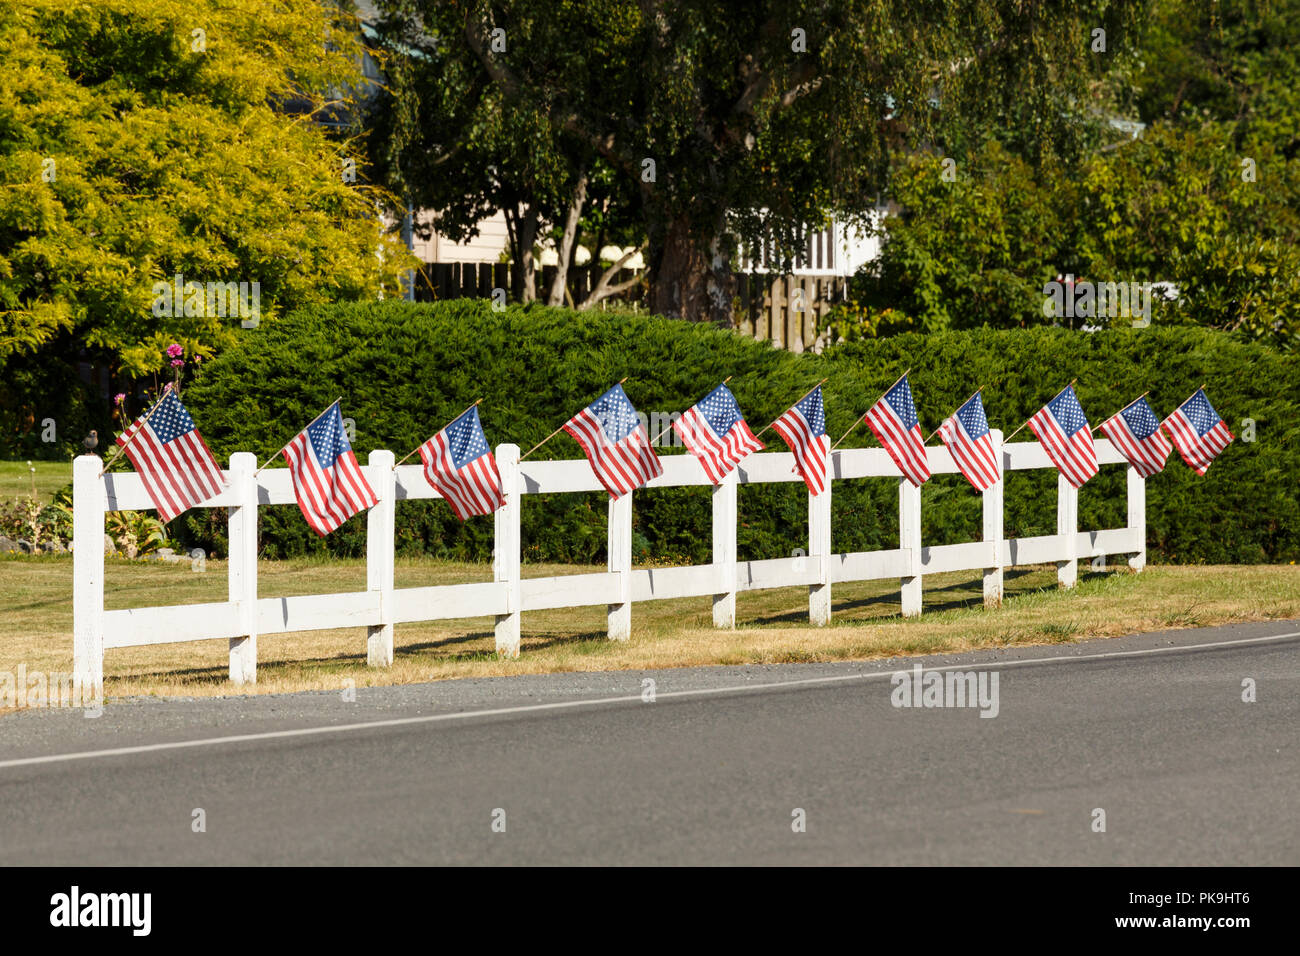 Patriotic display of American flags waving on white picket fence next to a road. Typical small town Fourth of July Independence Day decorations. Stock Photo